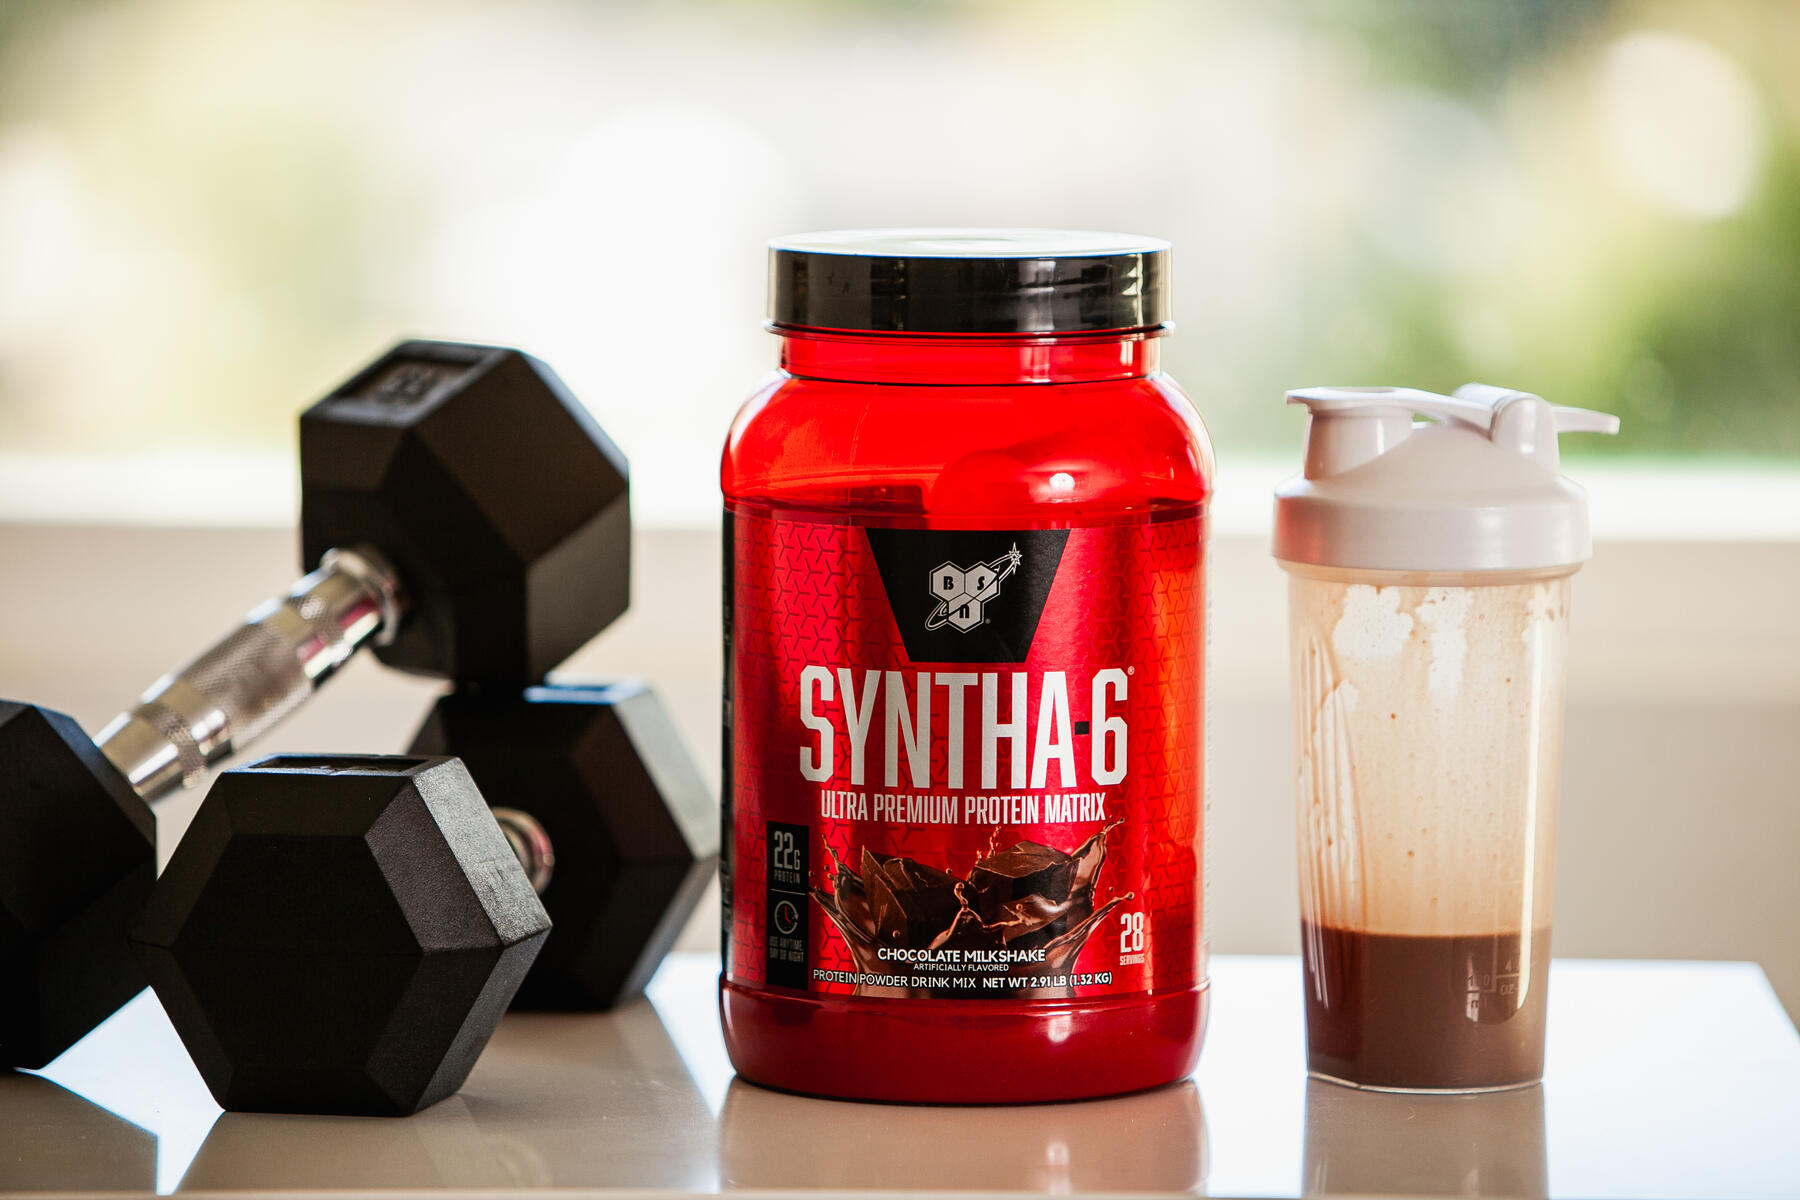 A bright red container of Syntha-6 protein powder on a white surface next to black dumbbells and a white shaker bottle with chocolate-flavored drink, with a blurred natural backdrop visible through a window